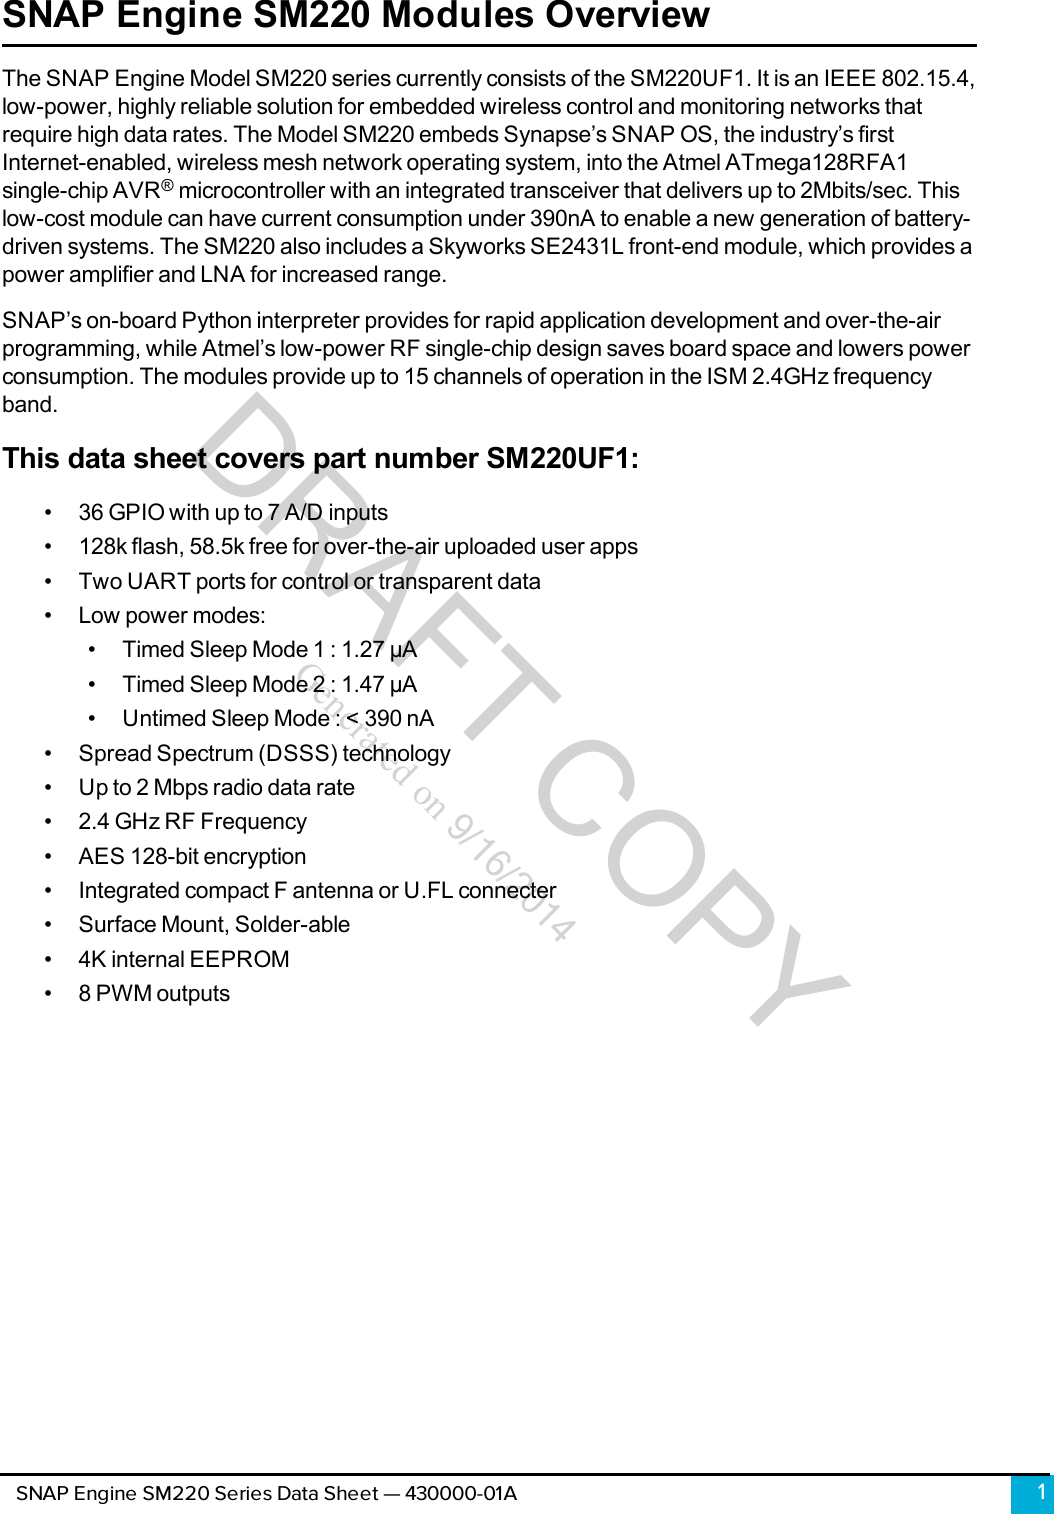 DRAFT COPYGenerated on 9/16/2014SNAP Engine SM220 Modules OverviewThe SNAP Engine Model SM220 series currently consists of the SM220UF1. It is an IEEE 802.15.4,low-power, highly reliable solution for embedded wireless control and monitoring networks thatrequire high data rates. The Model SM220 embeds Synapse’s SNAP OS, the industry’s firstInternet-enabled, wireless mesh network operating system, into the Atmel ATmega128RFA1single-chip AVR®microcontroller with an integrated transceiver that delivers up to 2Mbits/sec. Thislow-cost module can have current consumption under 390nA to enable a new generation of battery-driven systems. The SM220 also includes a Skyworks SE2431L front-end module, which provides apower amplifier and LNAfor increased range.SNAP’s on-board Python interpreter provides for rapid application development and over-the-airprogramming, while Atmel’s low-power RF single-chip design saves board space and lowers powerconsumption. The modules provide up to 15 channels of operation in the ISM 2.4GHz frequencyband.This data sheet covers part number SM220UF1:• 36 GPIO with up to 7 A/D inputs• 128k flash, 58.5k free for over-the-air uploaded user apps• Two UART ports for control or transparent data• Low power modes:• Timed Sleep Mode 1: 1.27 µA• Timed Sleep Mode 2 : 1.47 µA• Untimed Sleep Mode : &lt; 390 nA• Spread Spectrum (DSSS) technology• Up to 2 Mbps radio data rate• 2.4 GHz RF Frequency• AES 128-bit encryption• Integrated compact F antenna or U.FL connecter• Surface Mount, Solder-able• 4K internal EEPROM• 8 PWM outputs1SNAP Engine SM220 Series Data Sheet — 430000-01A